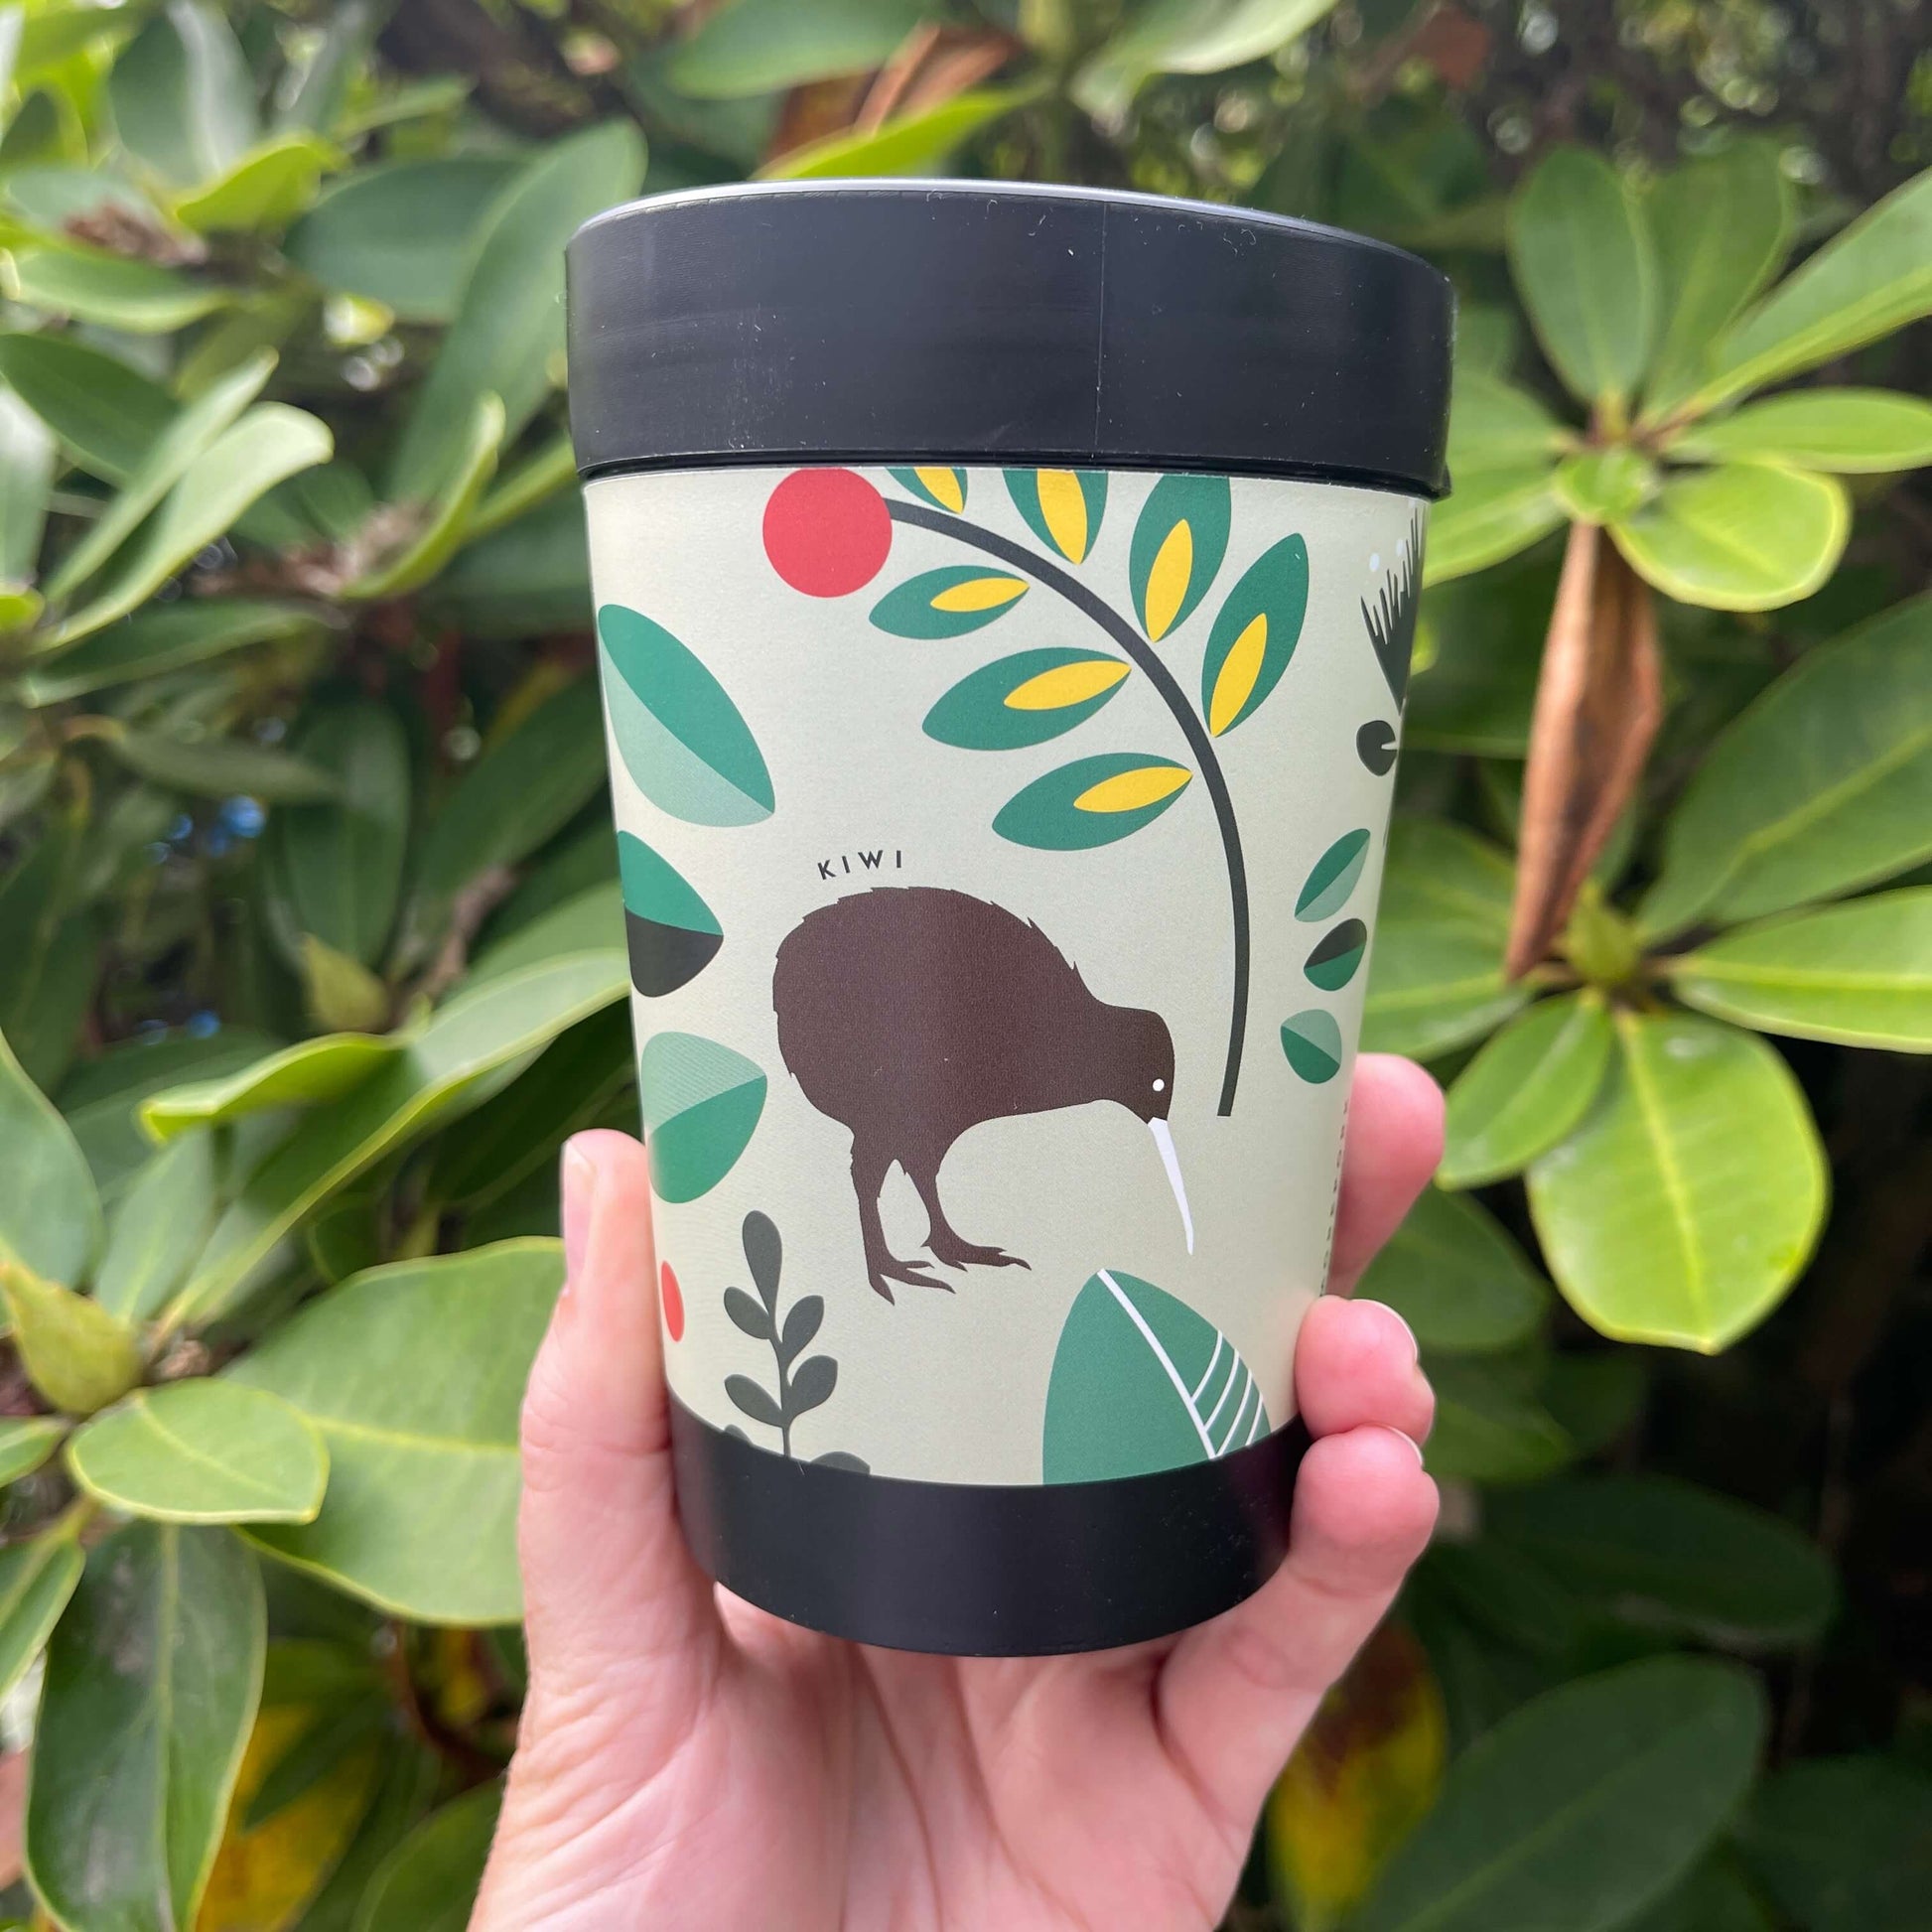 Black reusable coffee cup featuring New Zealand birds in a cartoon style on a minty green wrap background.